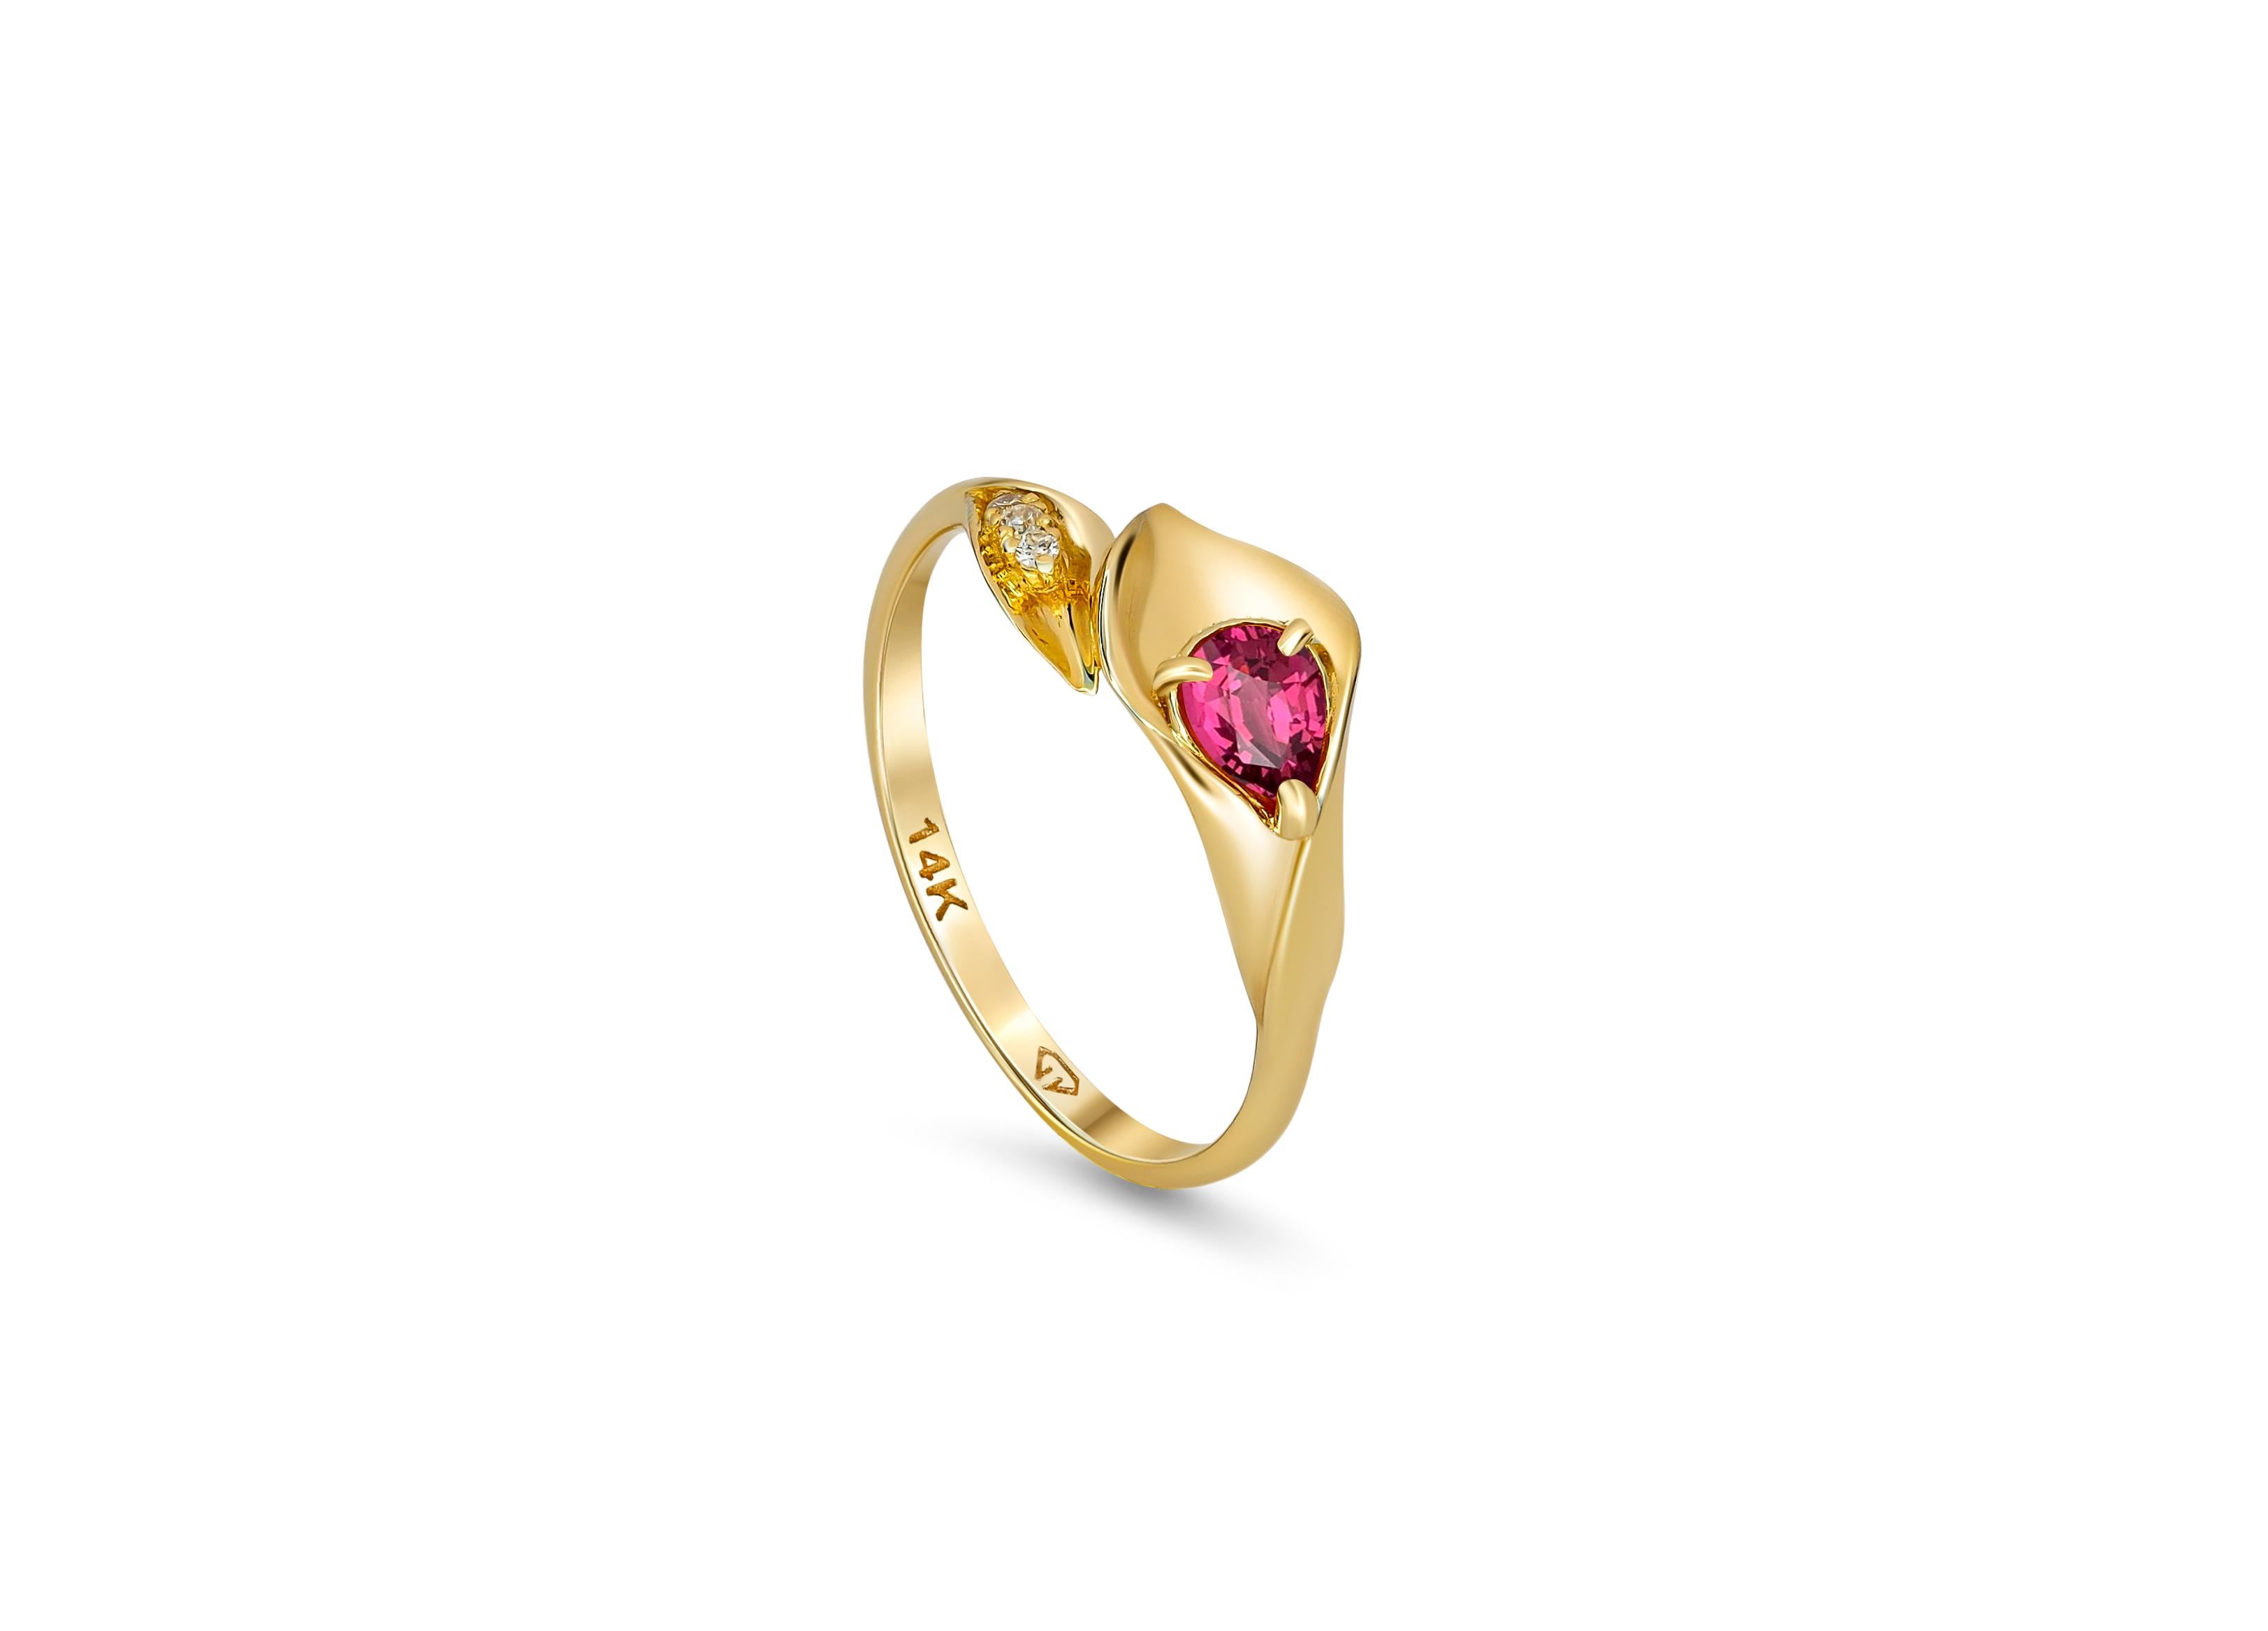 Lily calla gold ring. 
14 kt gold ring with Garnet and diamonds. Pear Garnet gold ring. Flower gold ring.

Weight: 1.8 g. depends from size
Metal: 14k gold.

Set with Garnet
Pear cut, 0.70 ct., red color
Clarity: Transparent with inclusions 